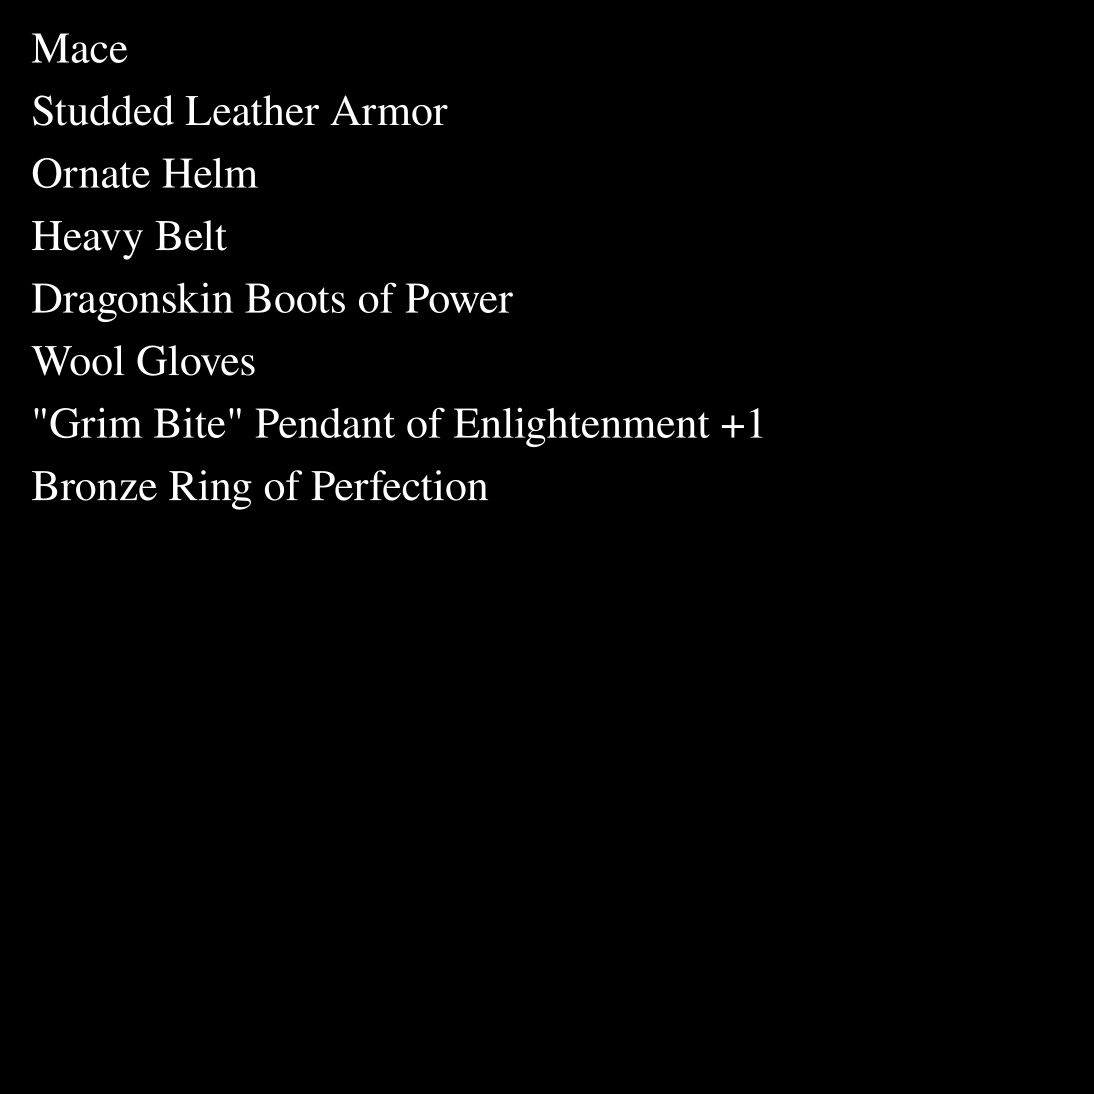 A list of fantasy adventure gear written in white text on a black background.